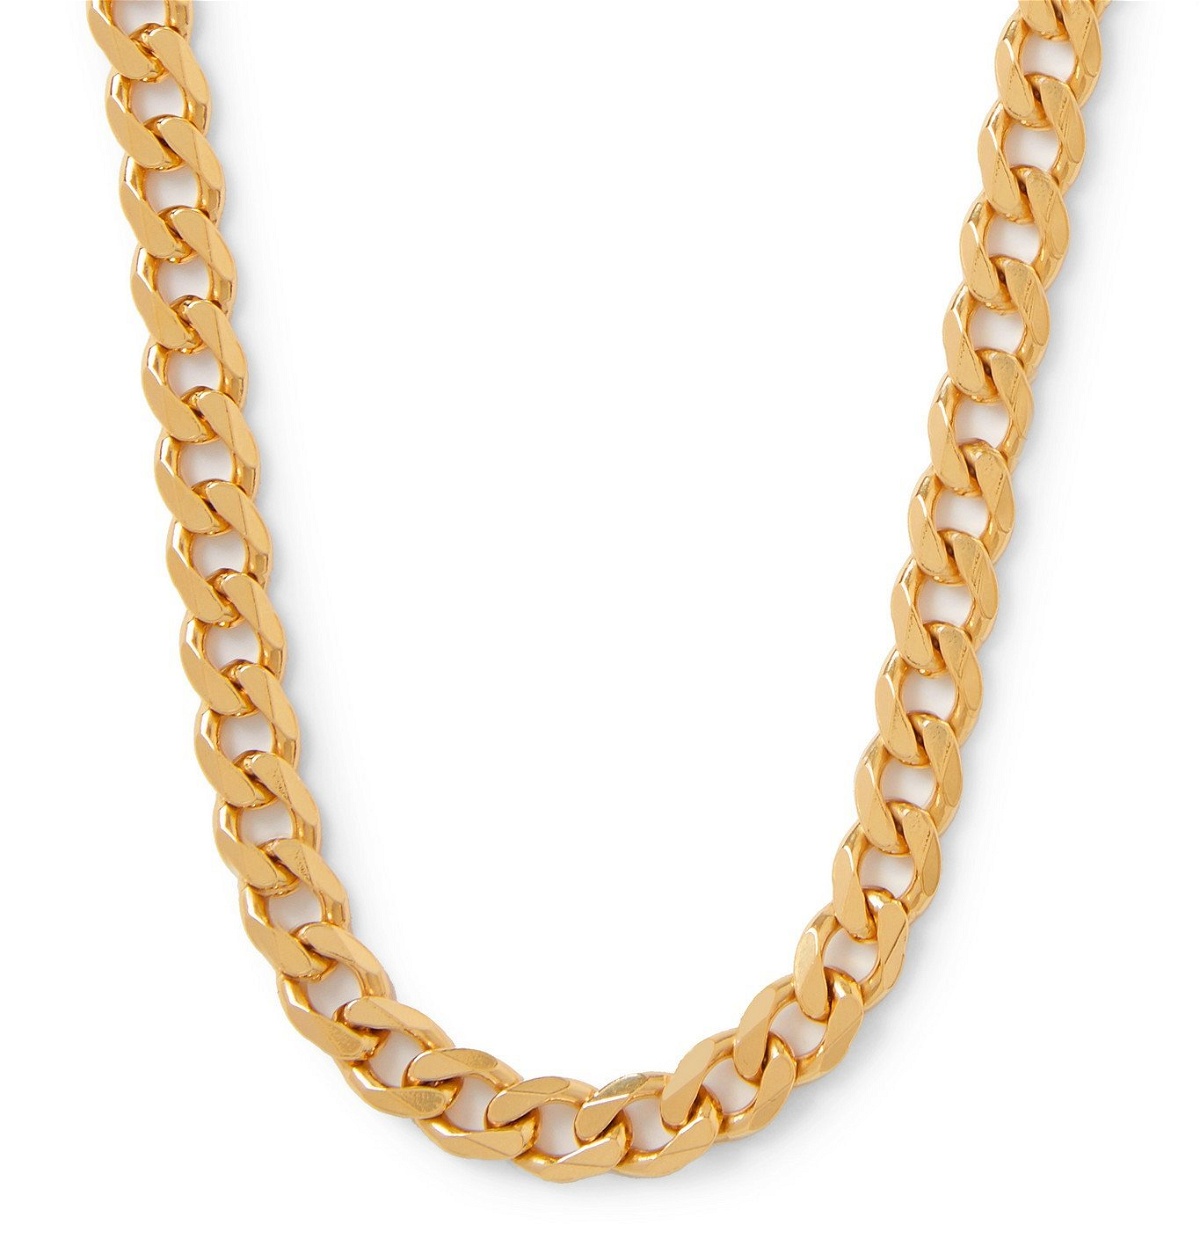 Maria Black - Forza Gold-Plated Chain Necklace - Gold Maria Black